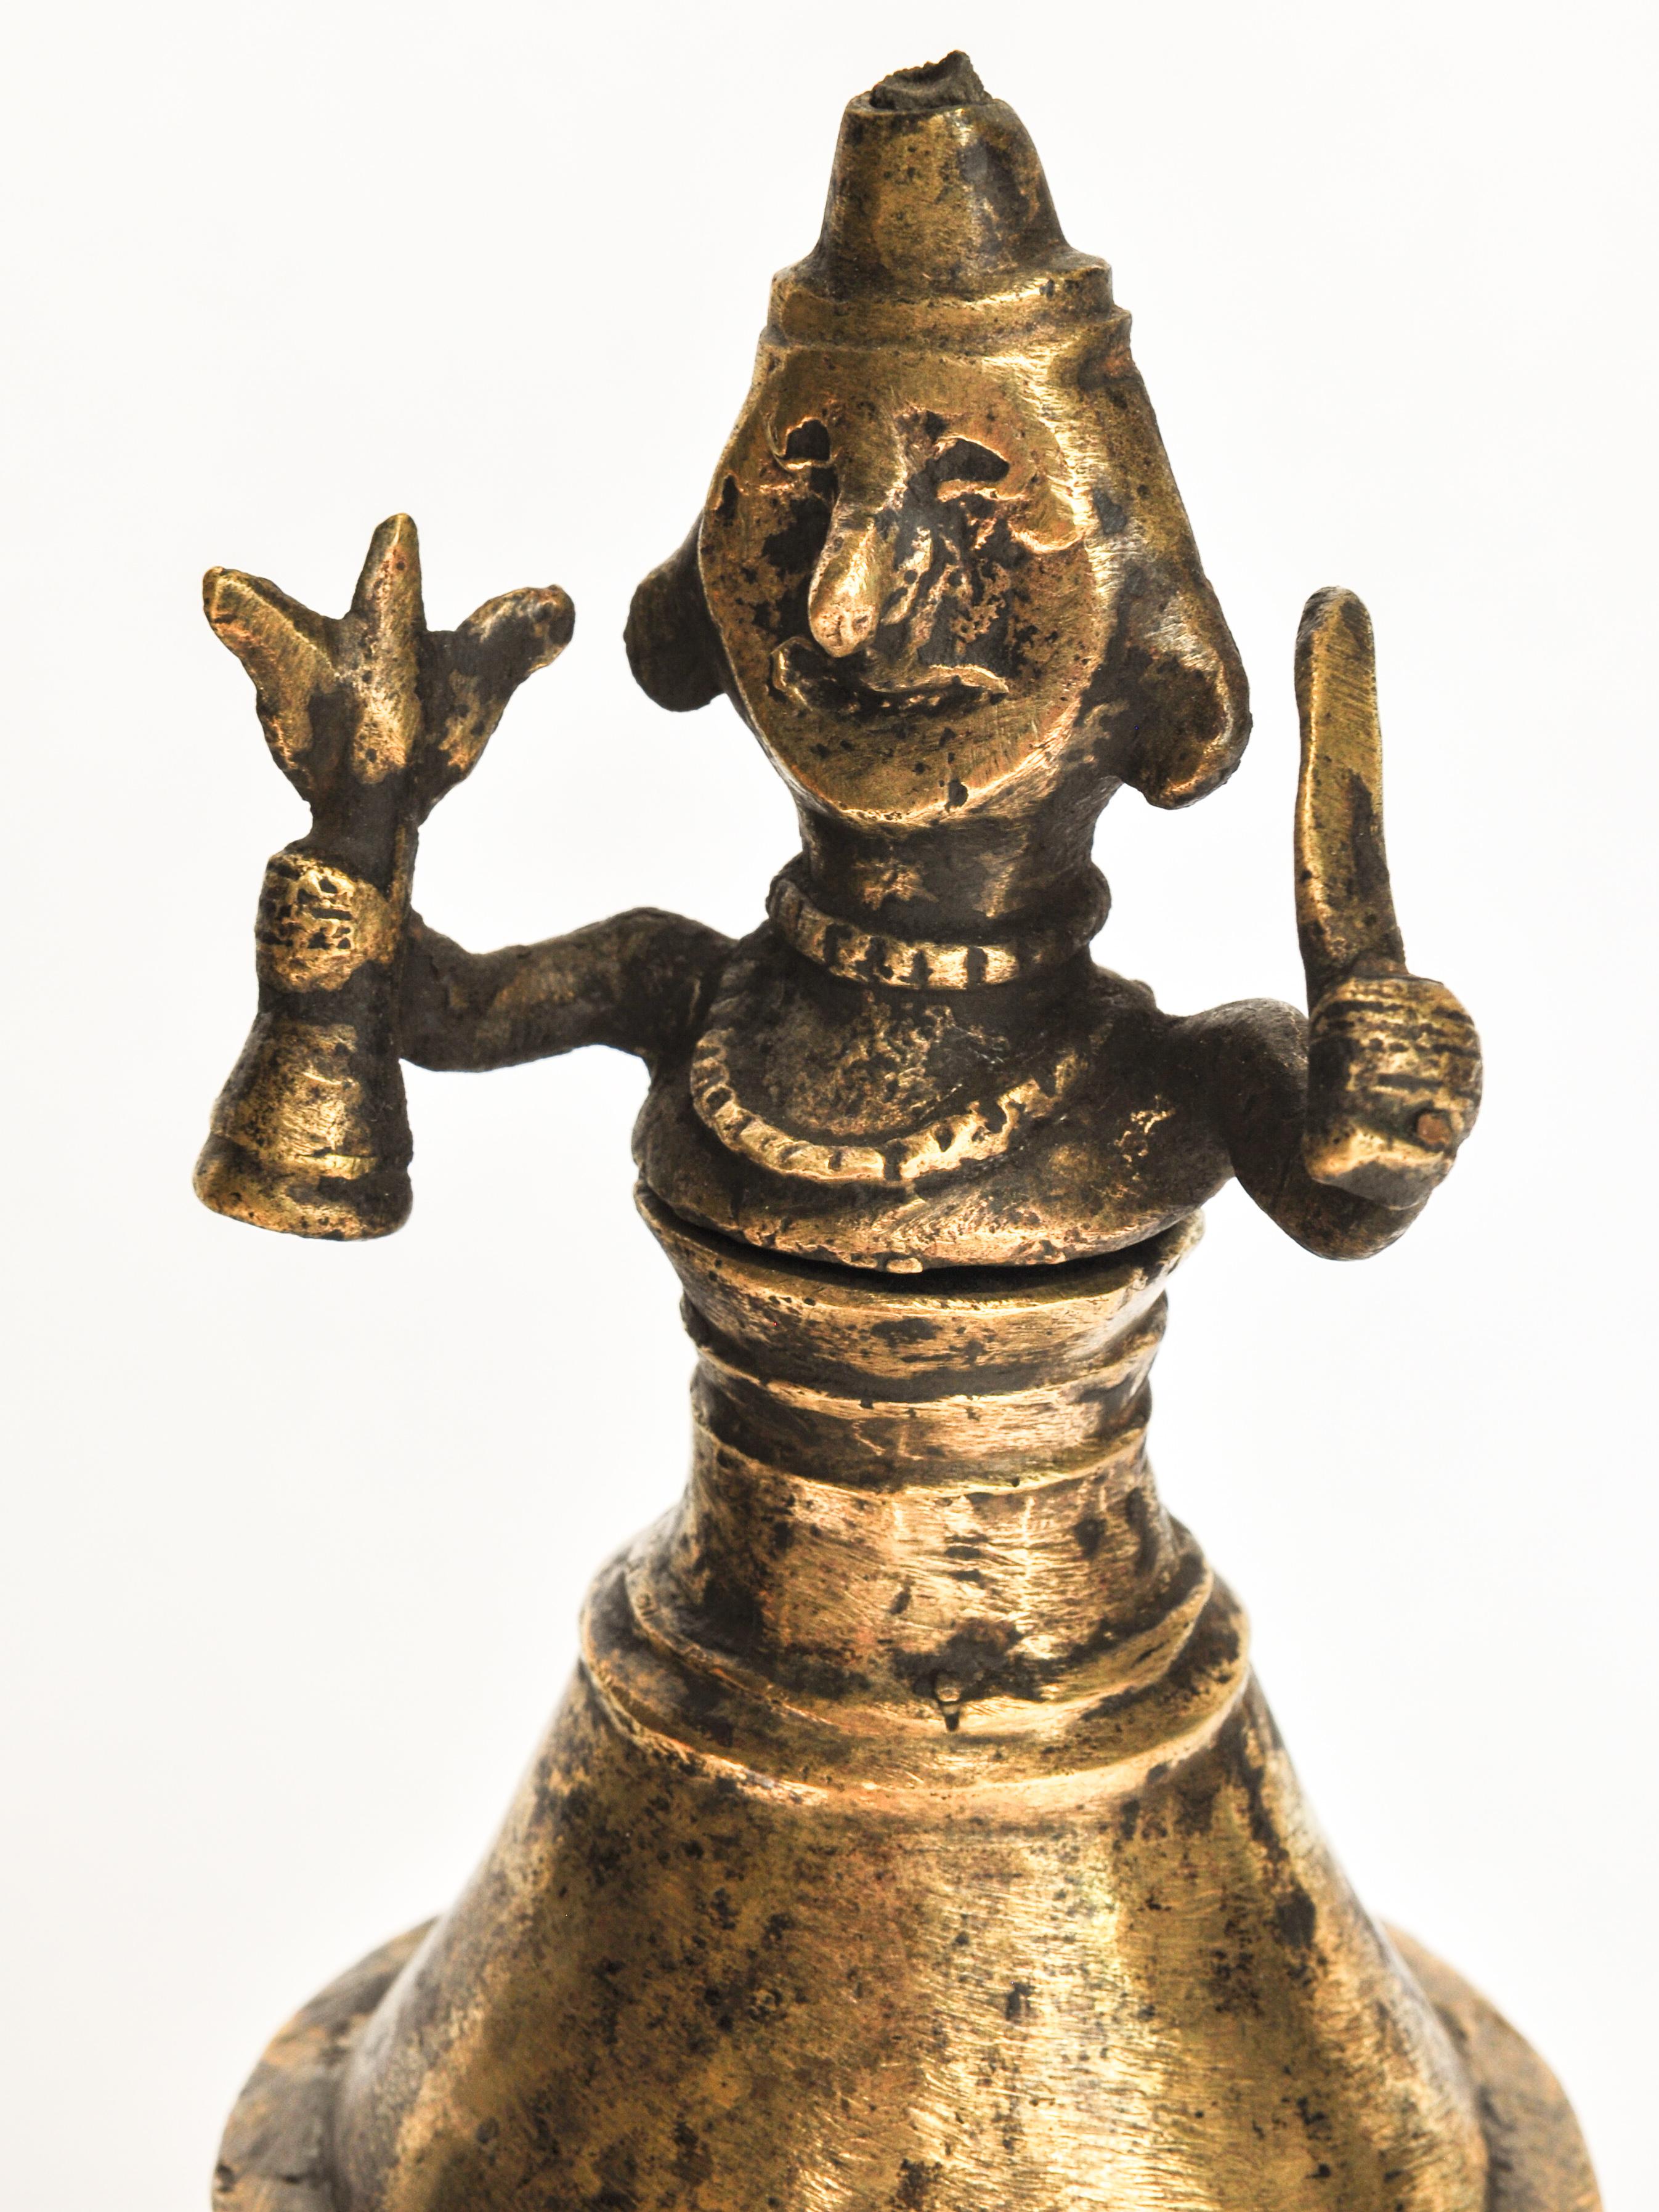 Hand-Crafted Vintage Bronze Oil Lamp with Shaman Figure from West Nepal, Mid-20th Century